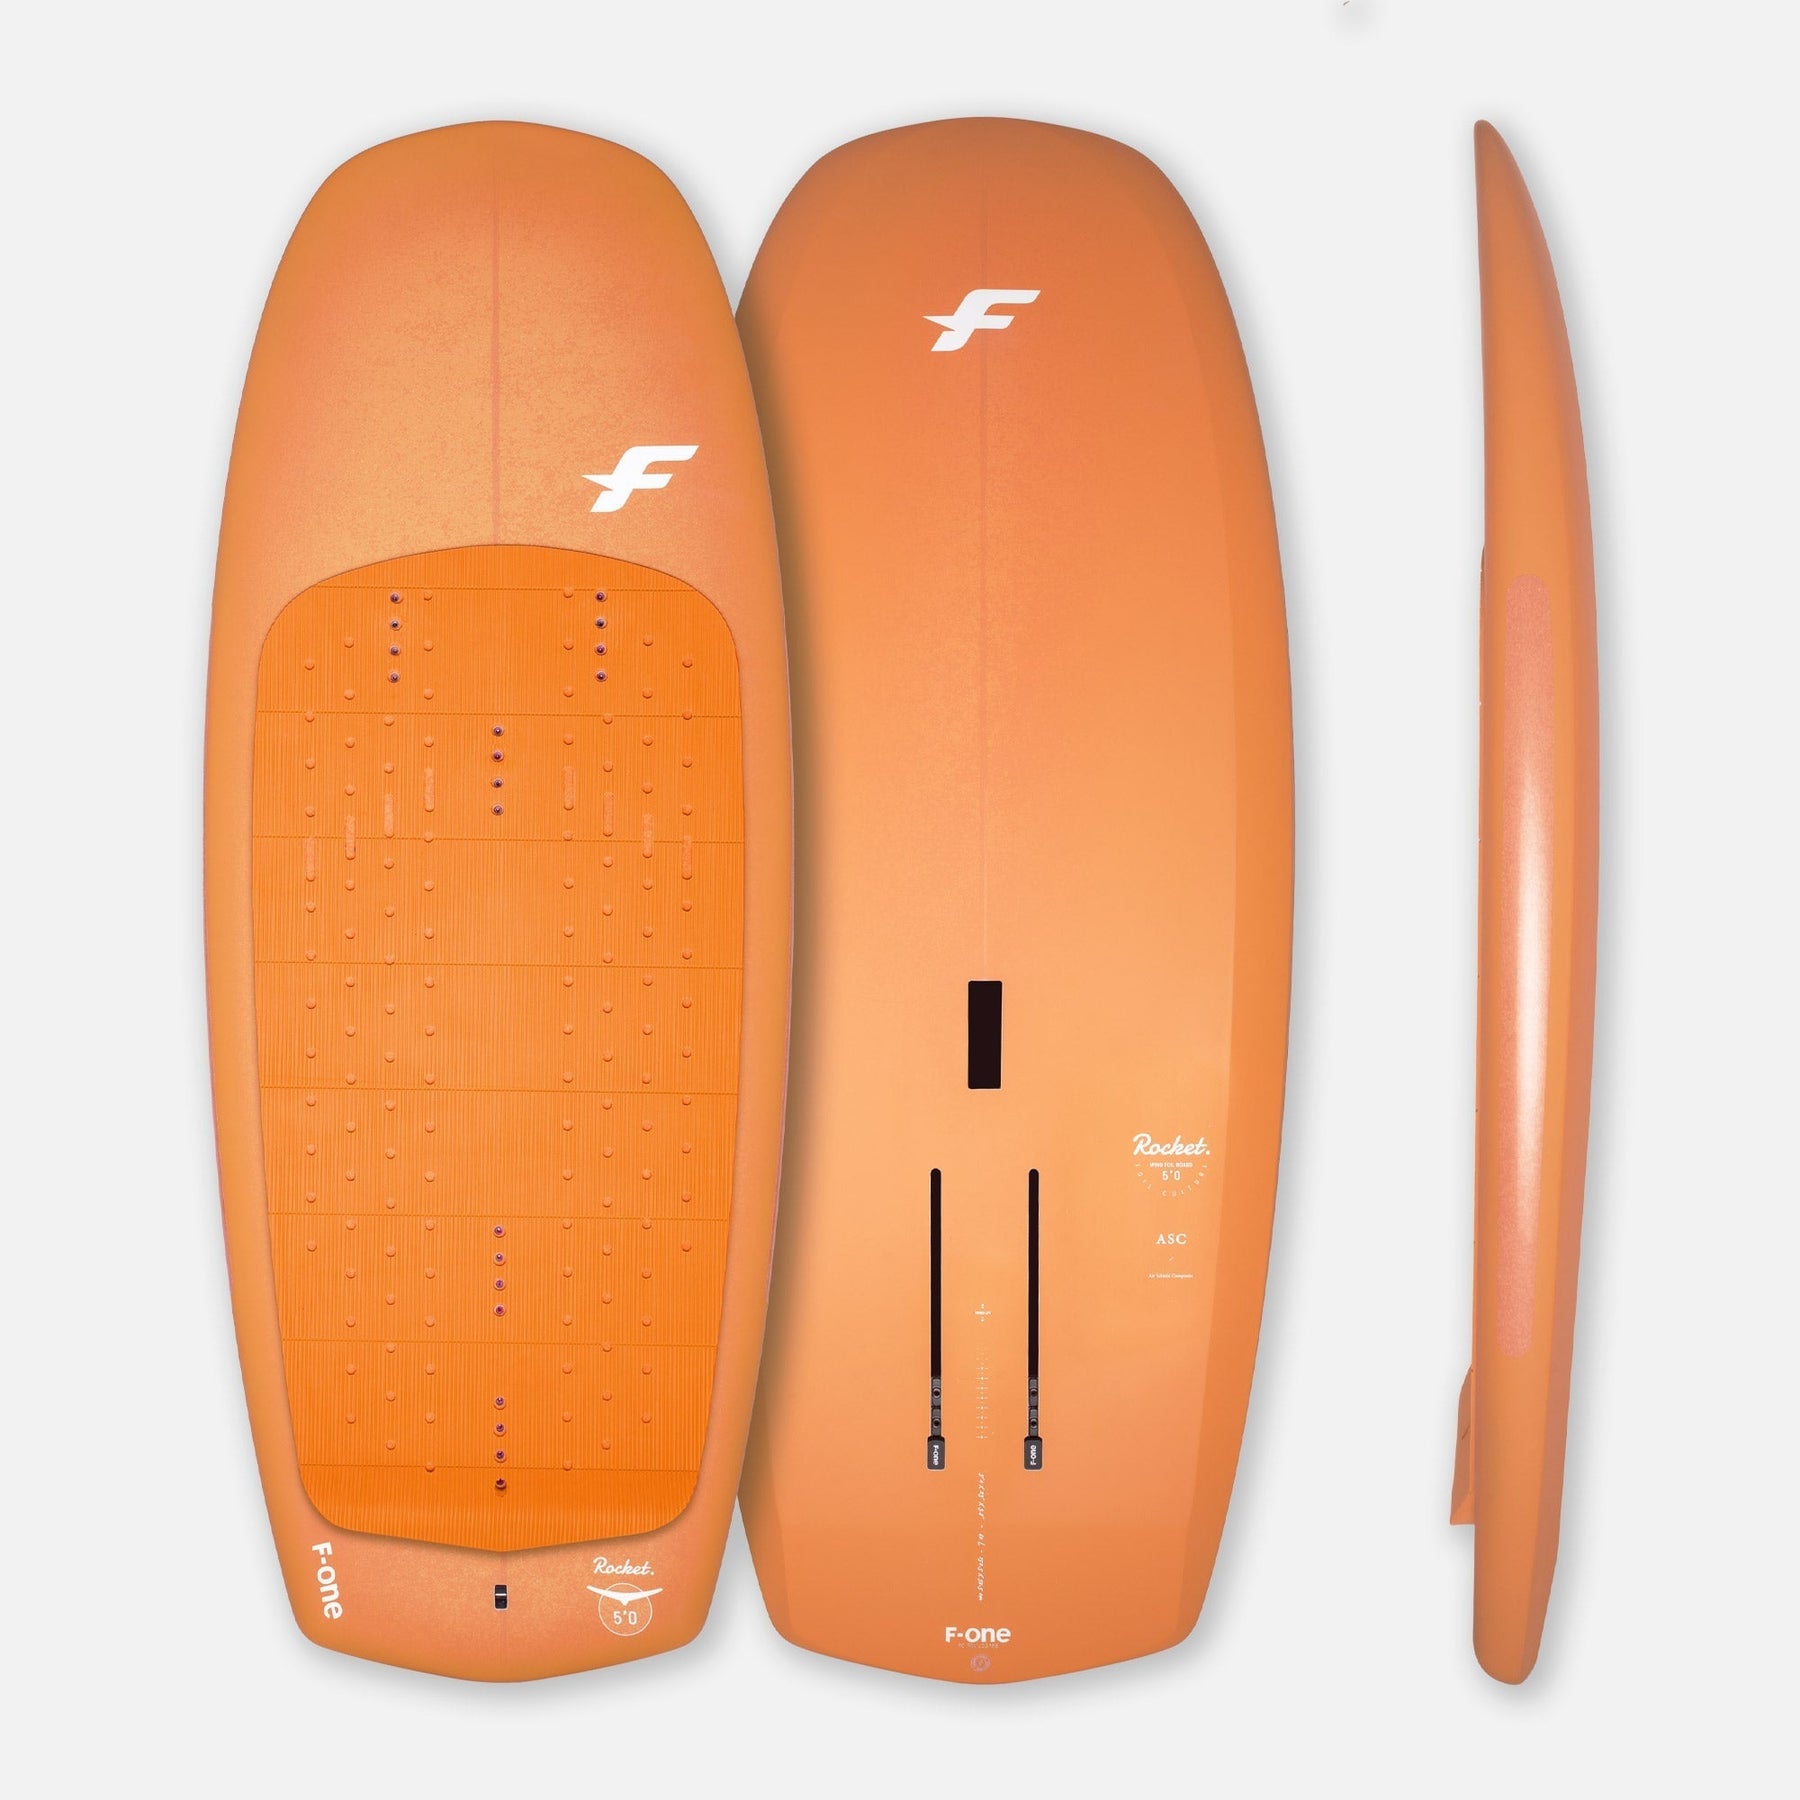 Wingfoilshop wingfoil-shop wingfoiling shop Wing Foiling F-One Wing ASC Board